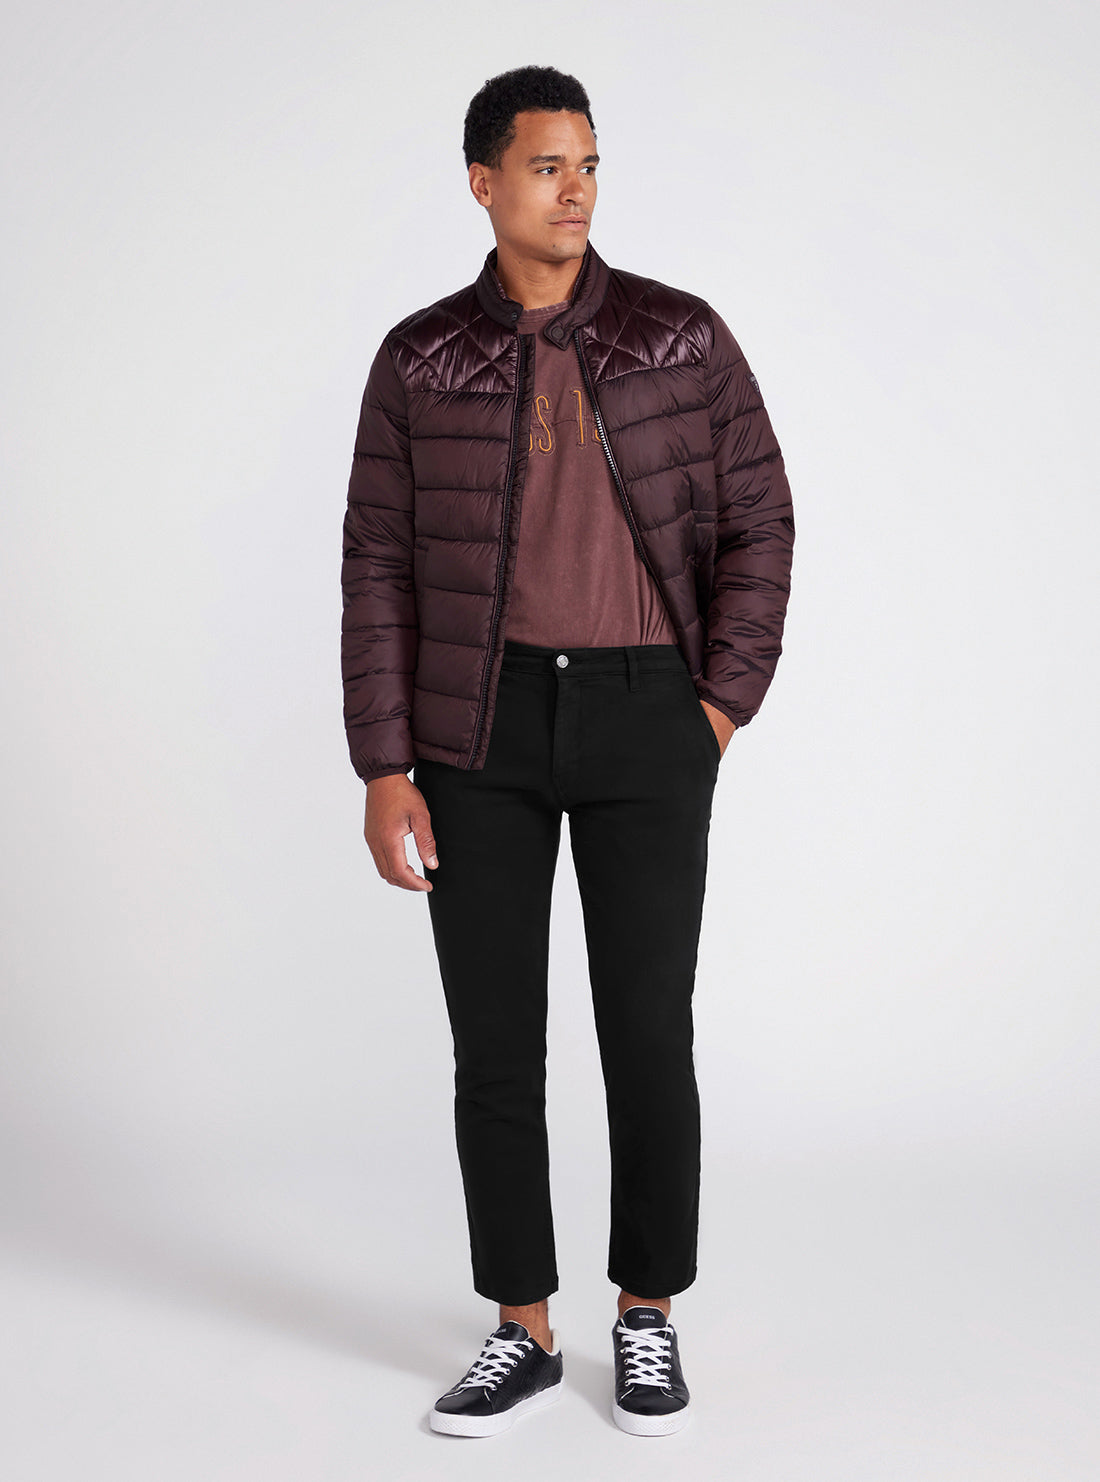 Eco Maroon Lightweight Puffer Jacket | GUESS men's apparel | full view